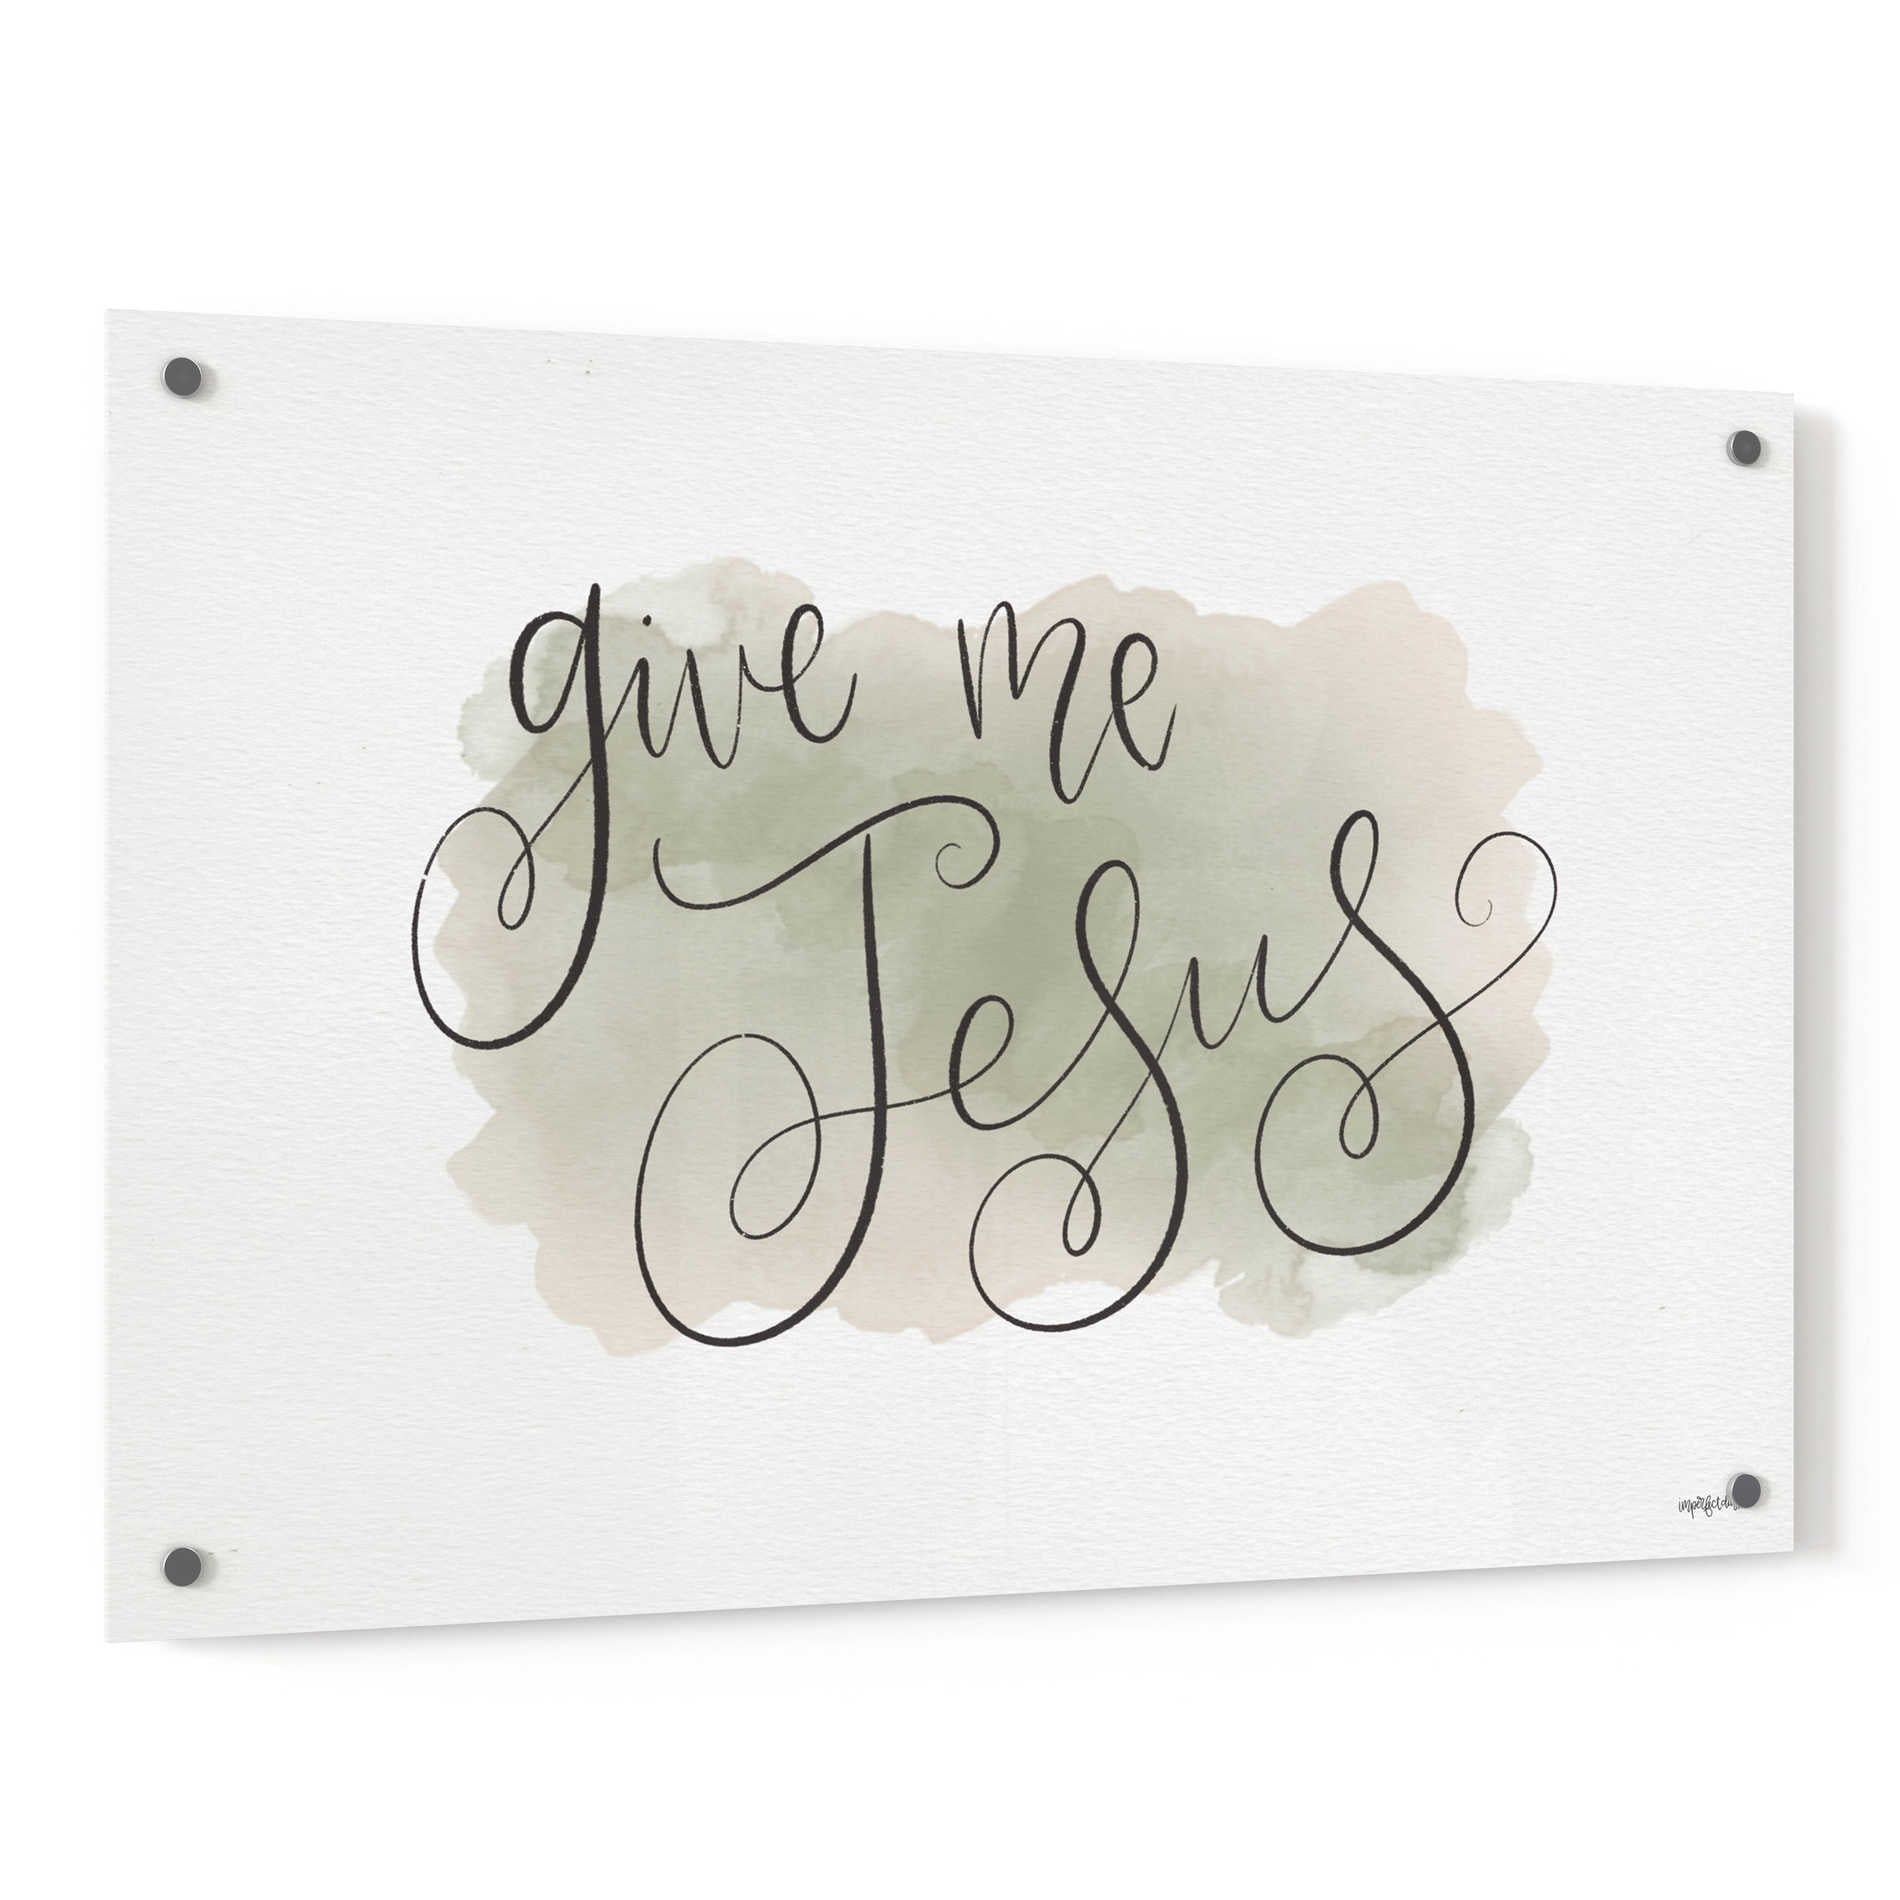 Epic Art 'Give Me Jesus' by Imperfect Dust, Acrylic Glass Wall Art,36x24